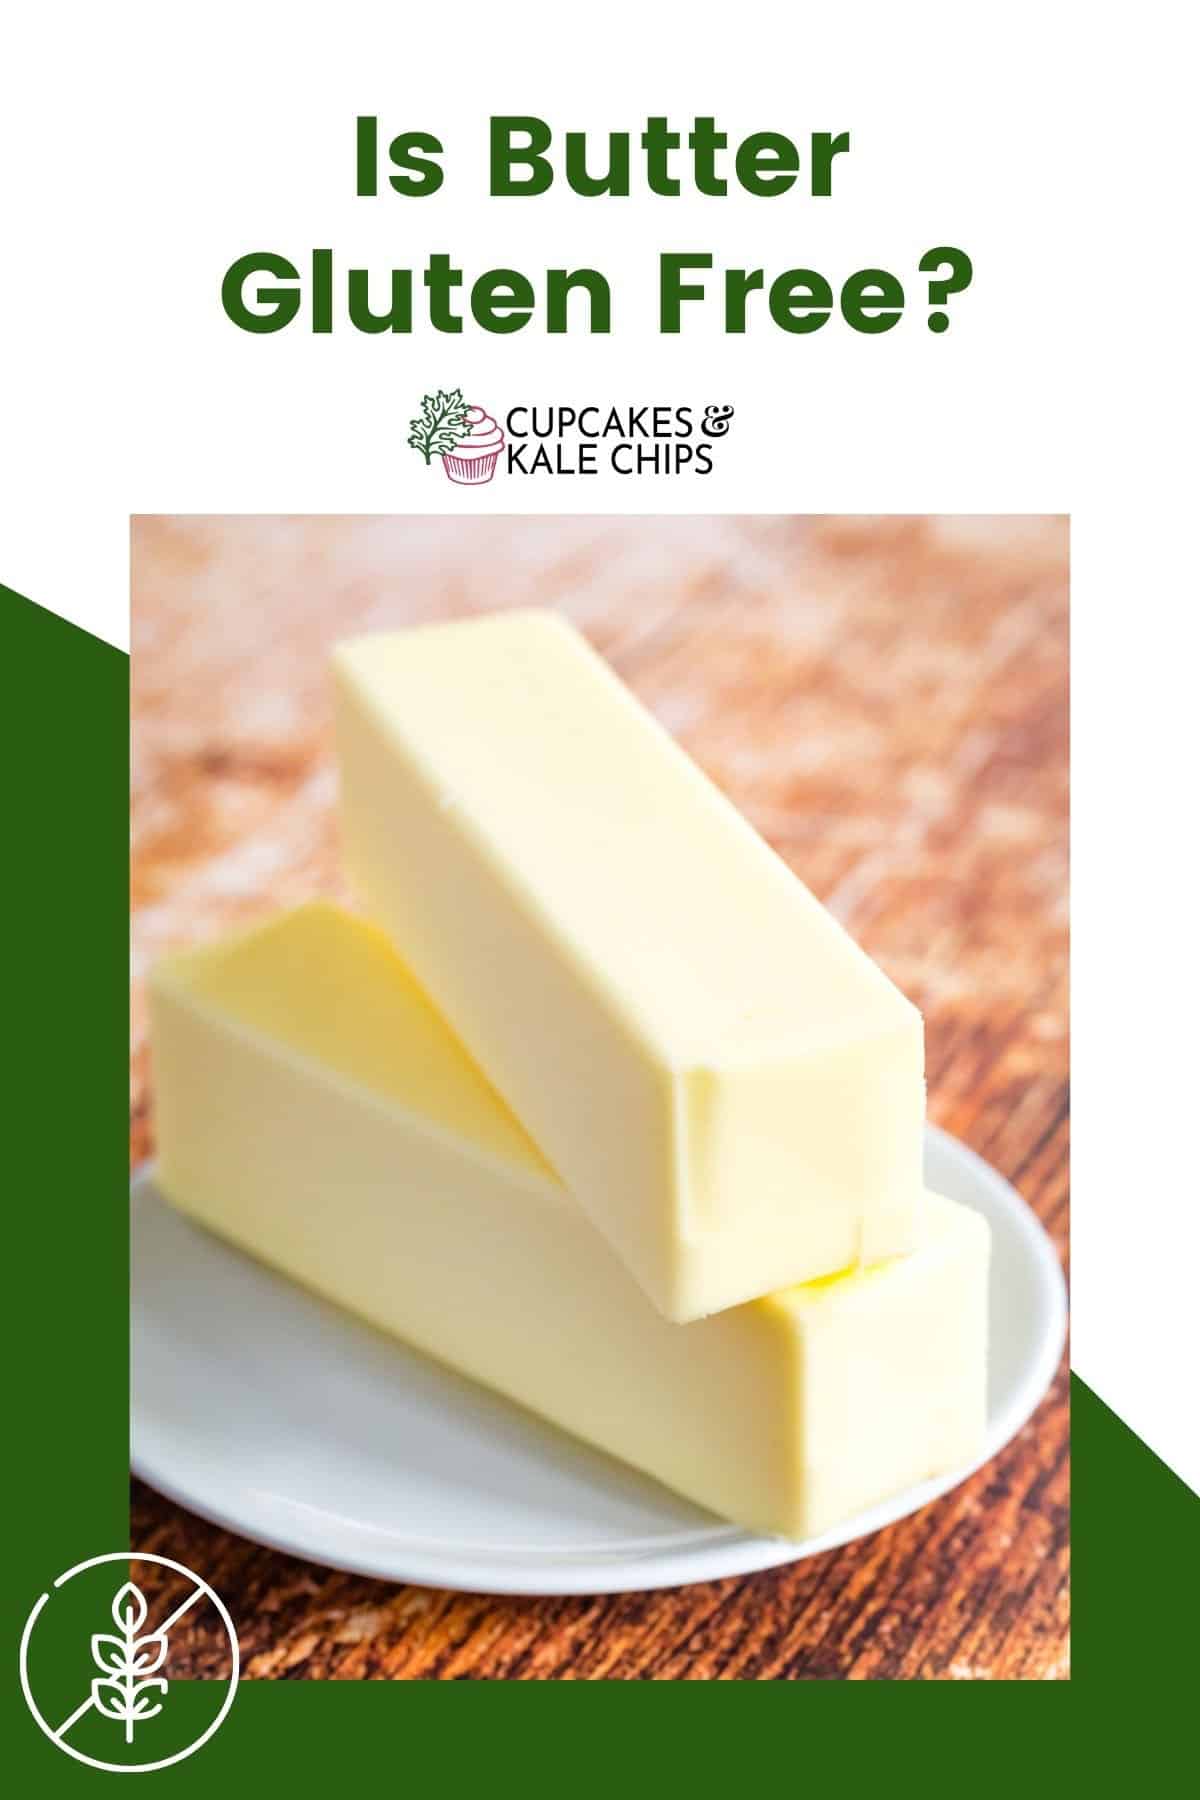 Two sticks of butter on a white plate on a green and white background with text overlay that says "Is Butter Gluten Free?"